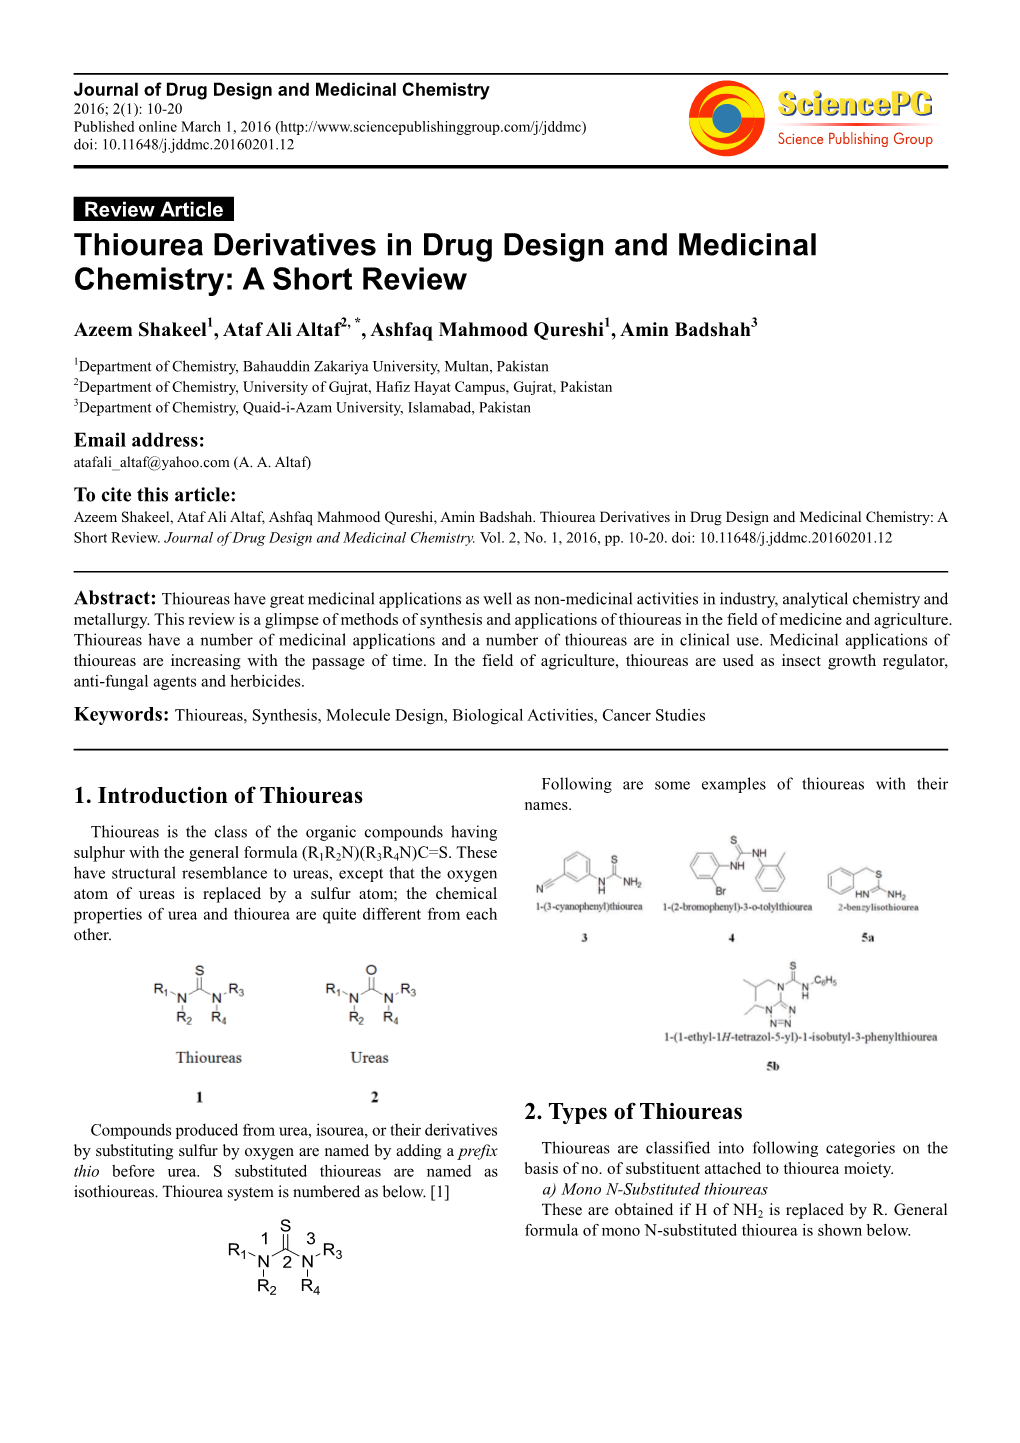 Thiourea Derivatives in Drug Design and Medicinal Chemistry: a Short Review